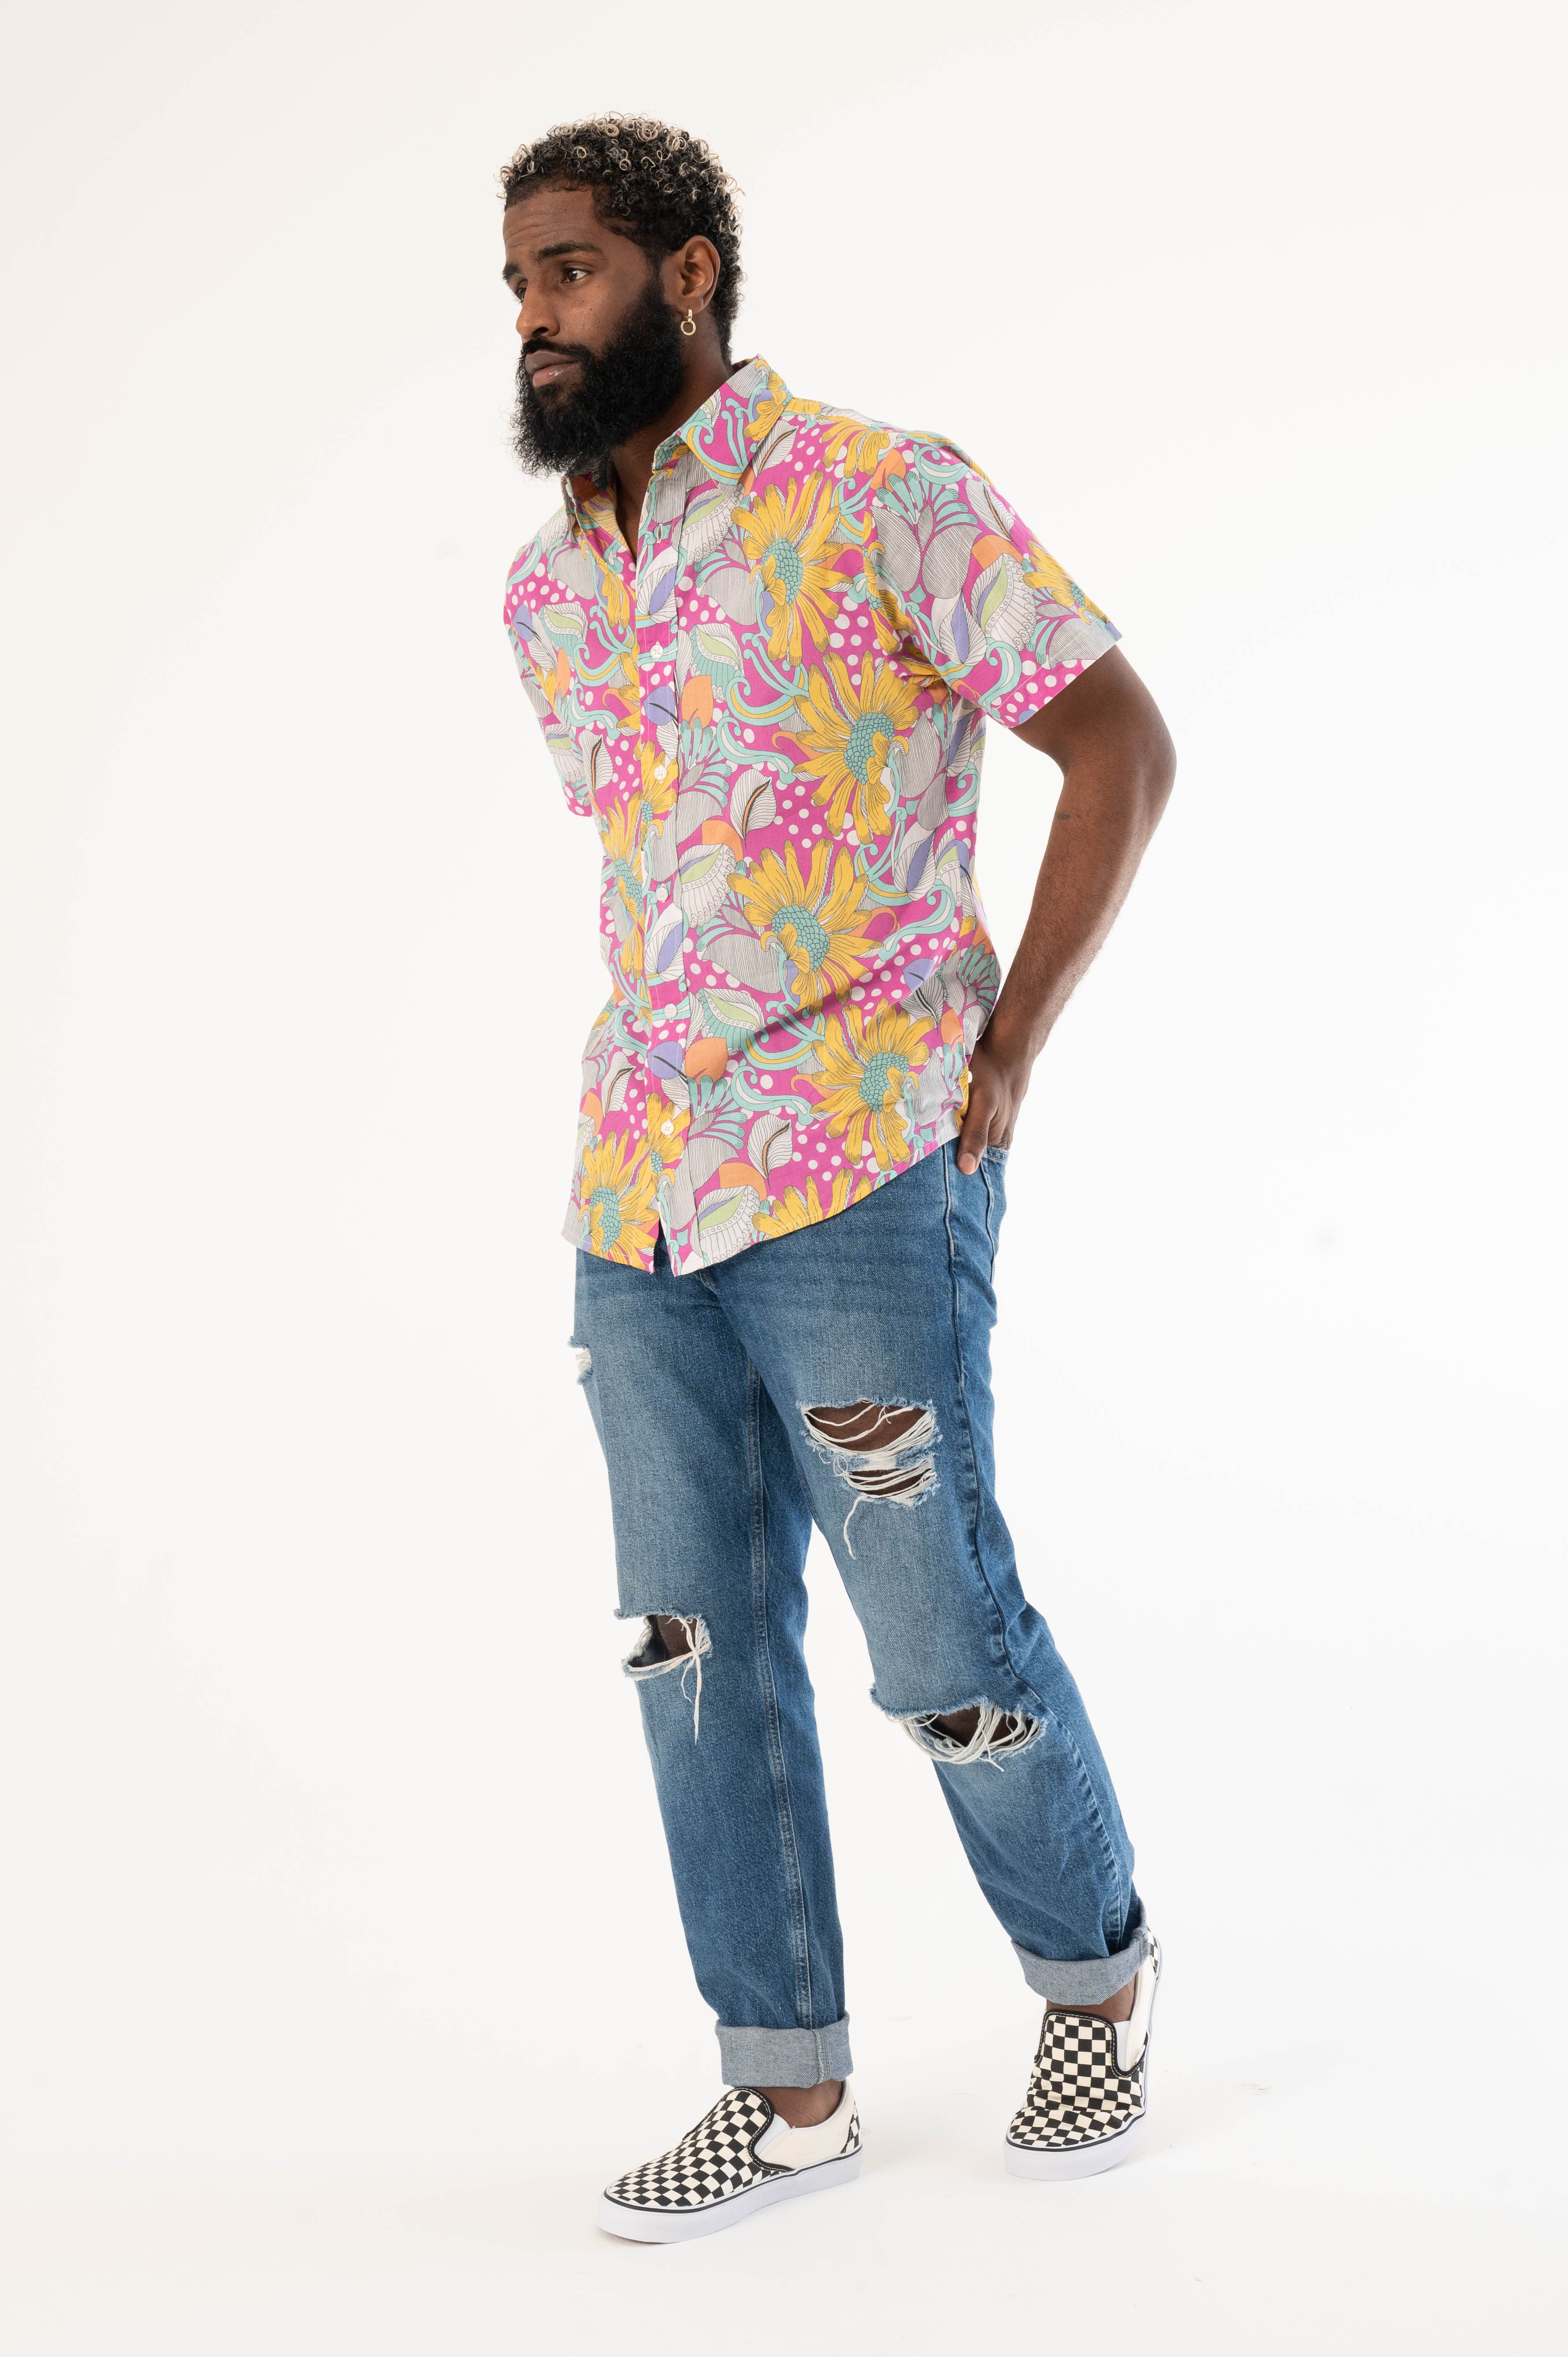 'The Sheril' Short Sleeve Shirt in Light Pink, Yellow and White (La Brea) Floral Print